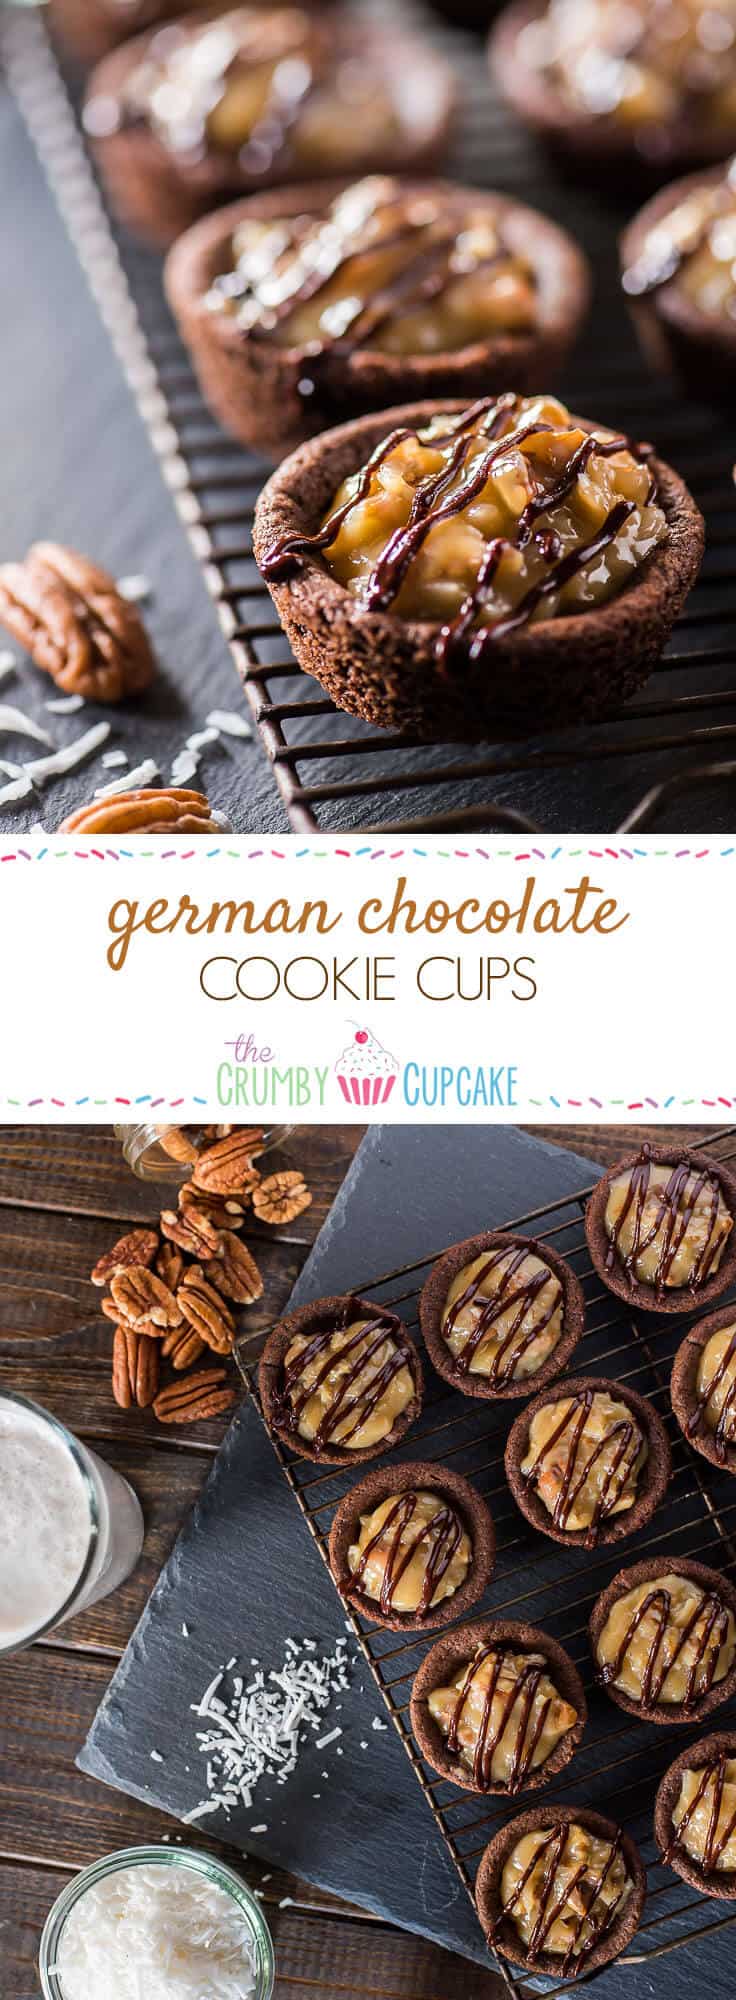 Cupcakes for cookie lovers! Ooey, gooey, and chewy, these German Chocolate Cookie Cups are the perfect treat to include in any holiday celebration!